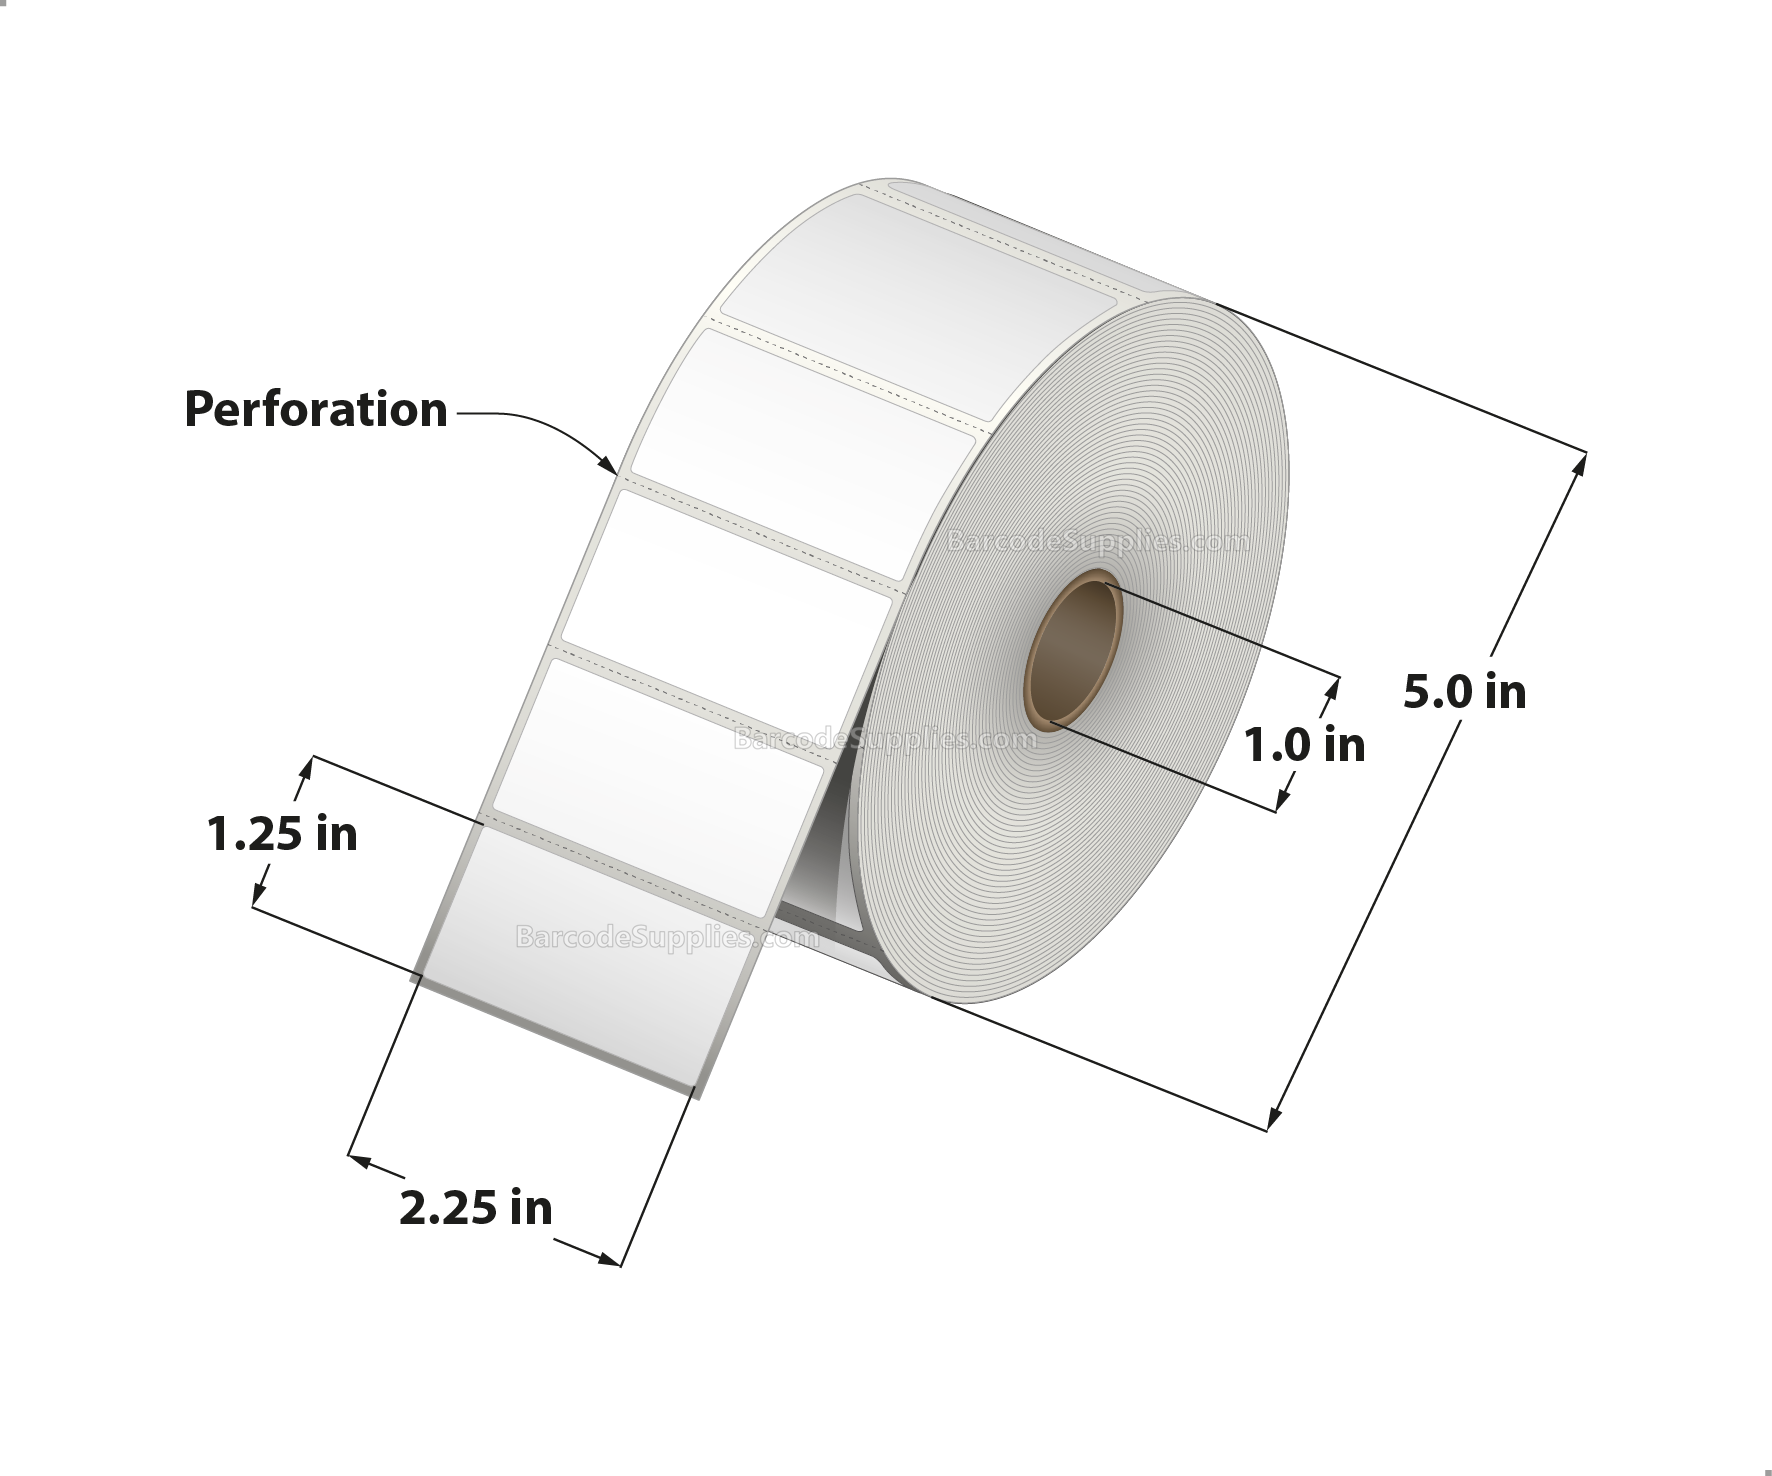 2.25 x 1.25 Direct Thermal White Labels With Rubber Adhesive - Perforated - 2100 Labels Per Roll - Carton Of 12 Rolls - 25200 Labels Total - MPN: RDT5-225125-1P